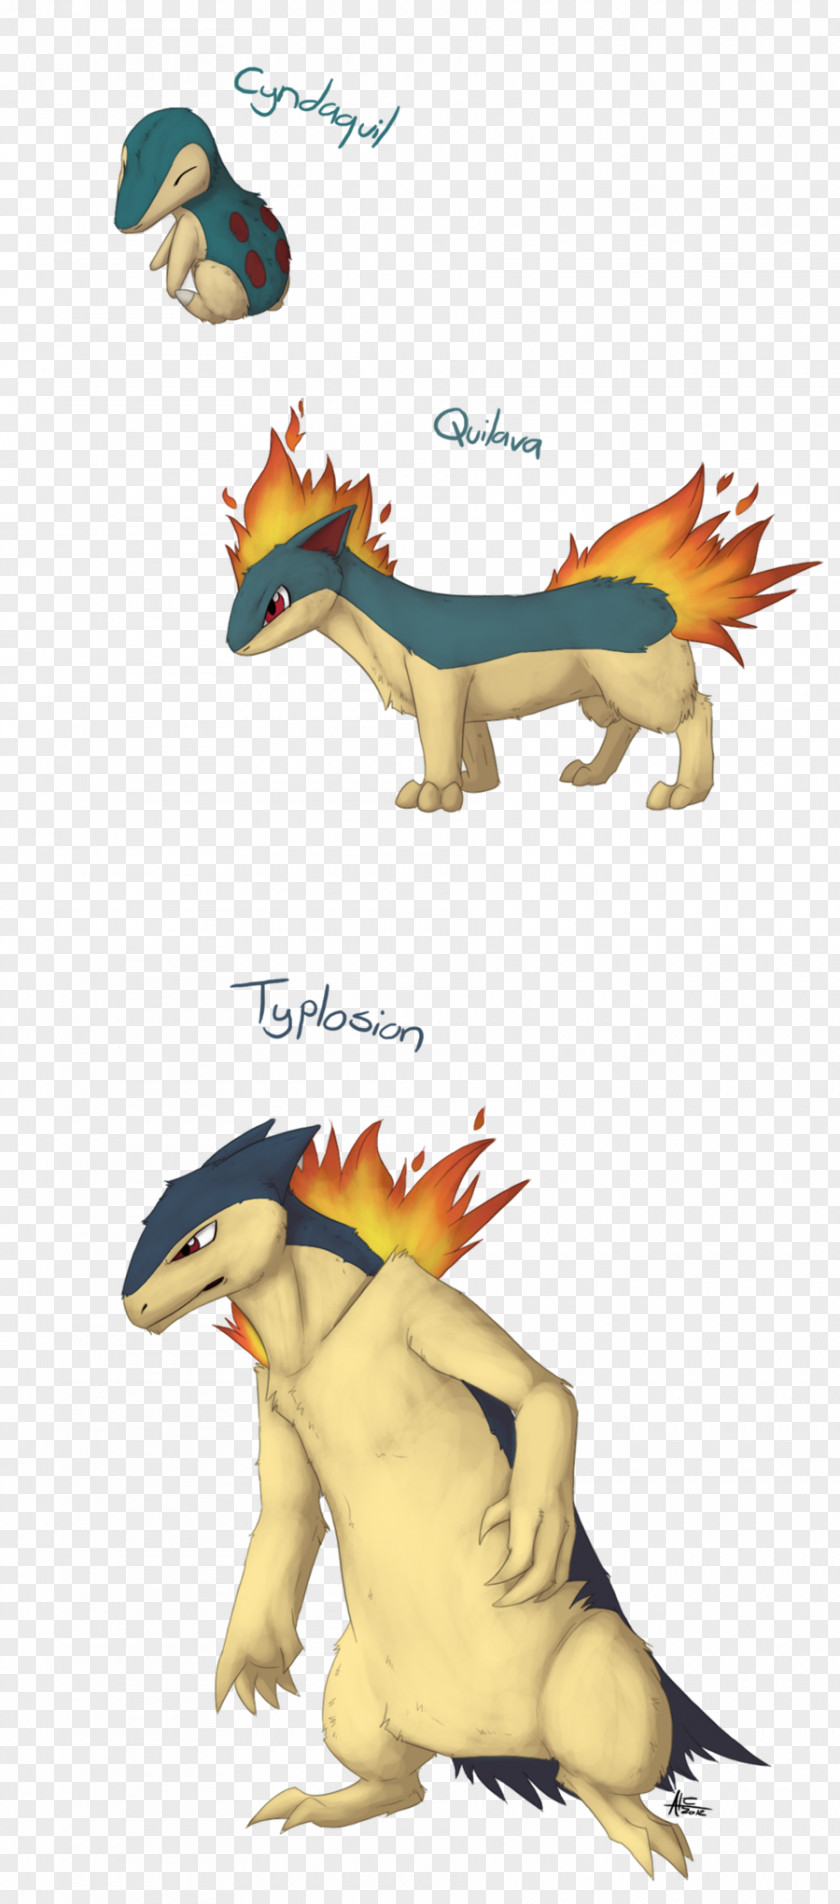 Cyndaquil Evolution Totodile Chikorita Quilava PNG